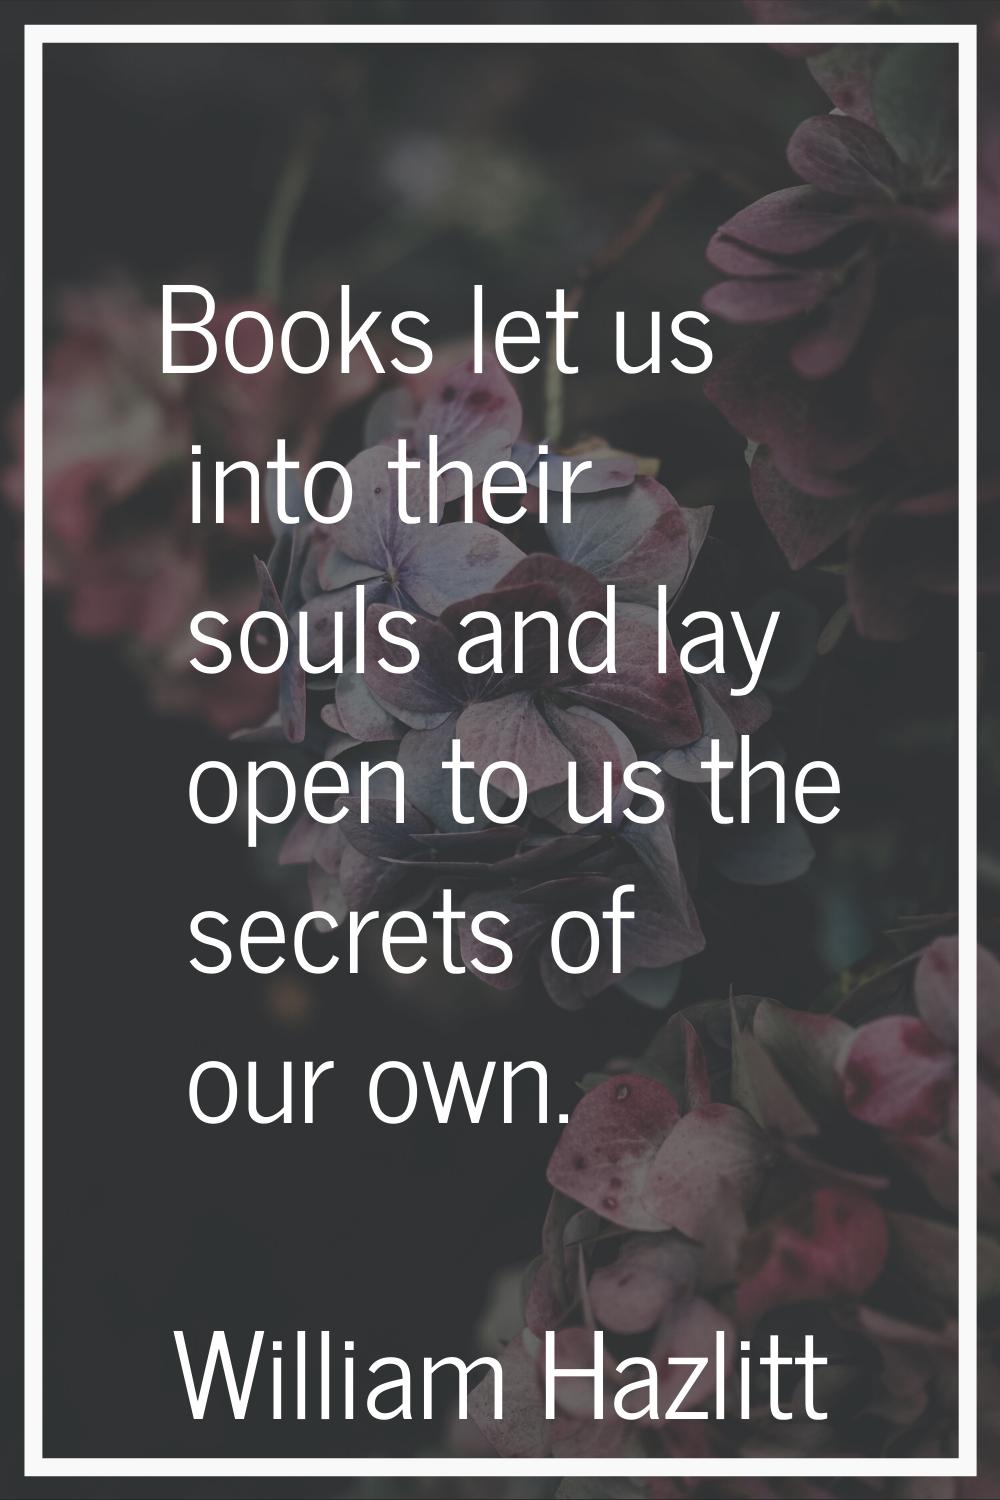 Books let us into their souls and lay open to us the secrets of our own.